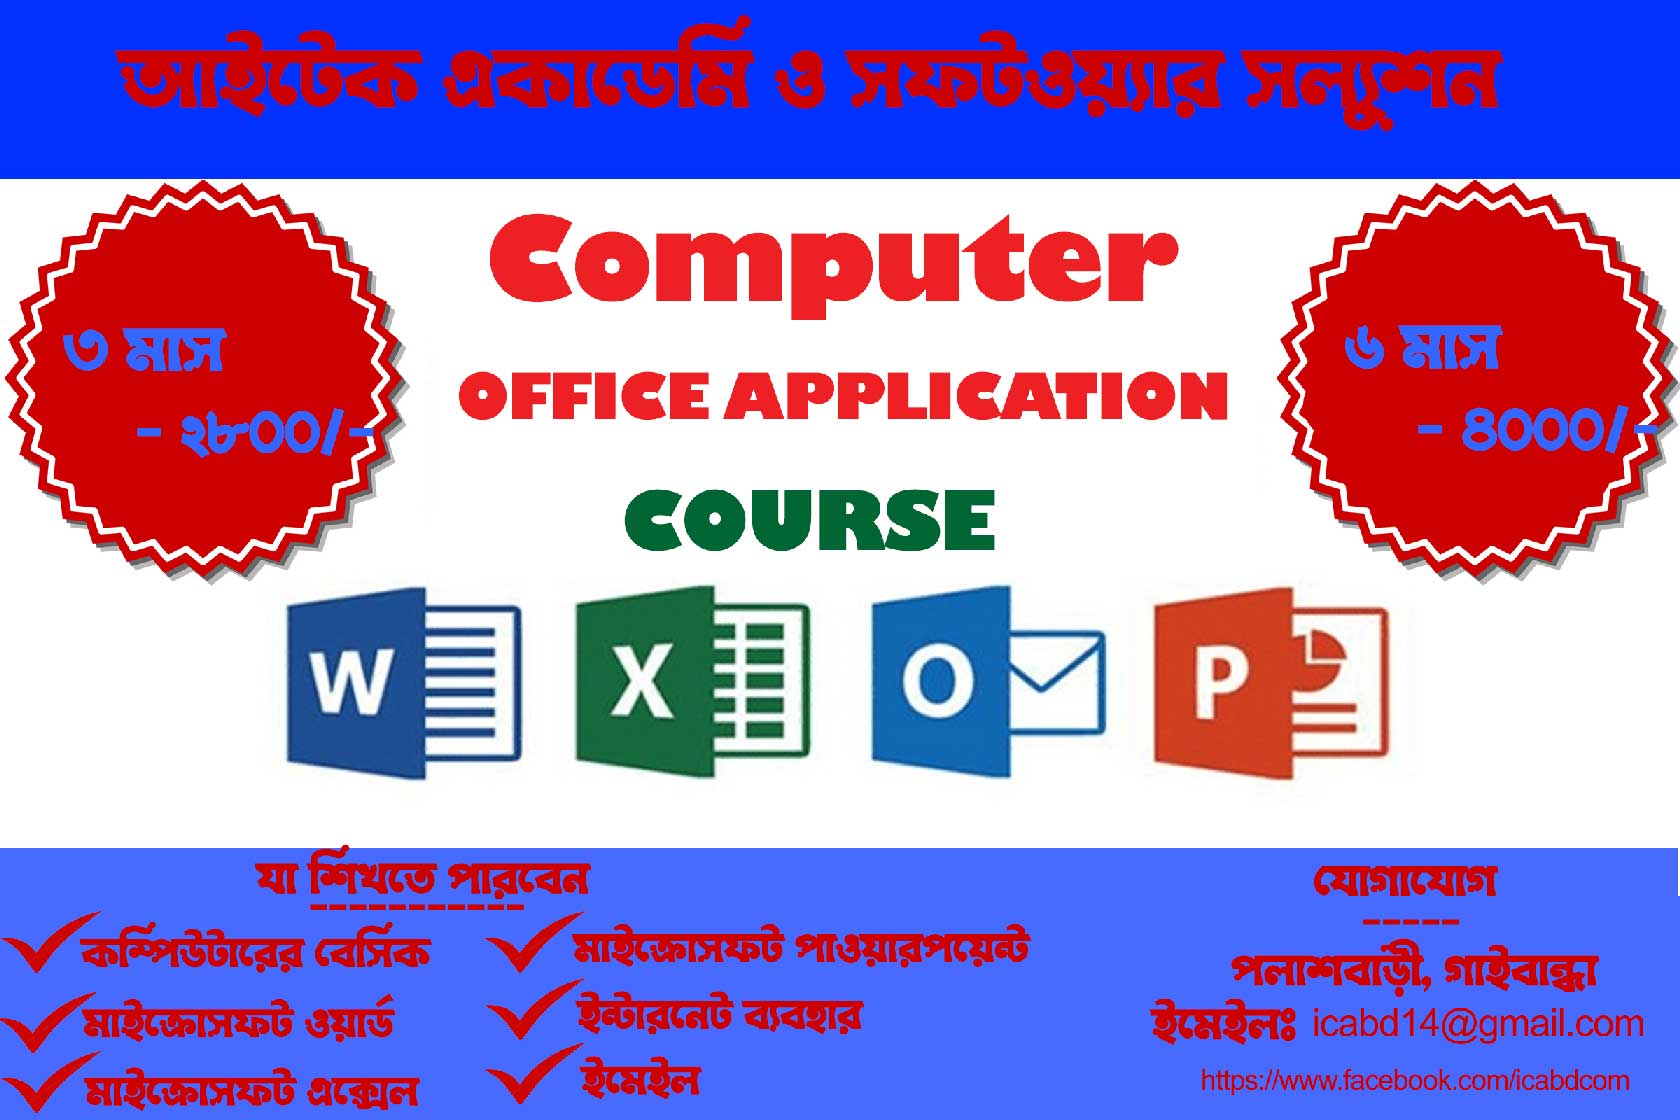 iTech Office Application Course